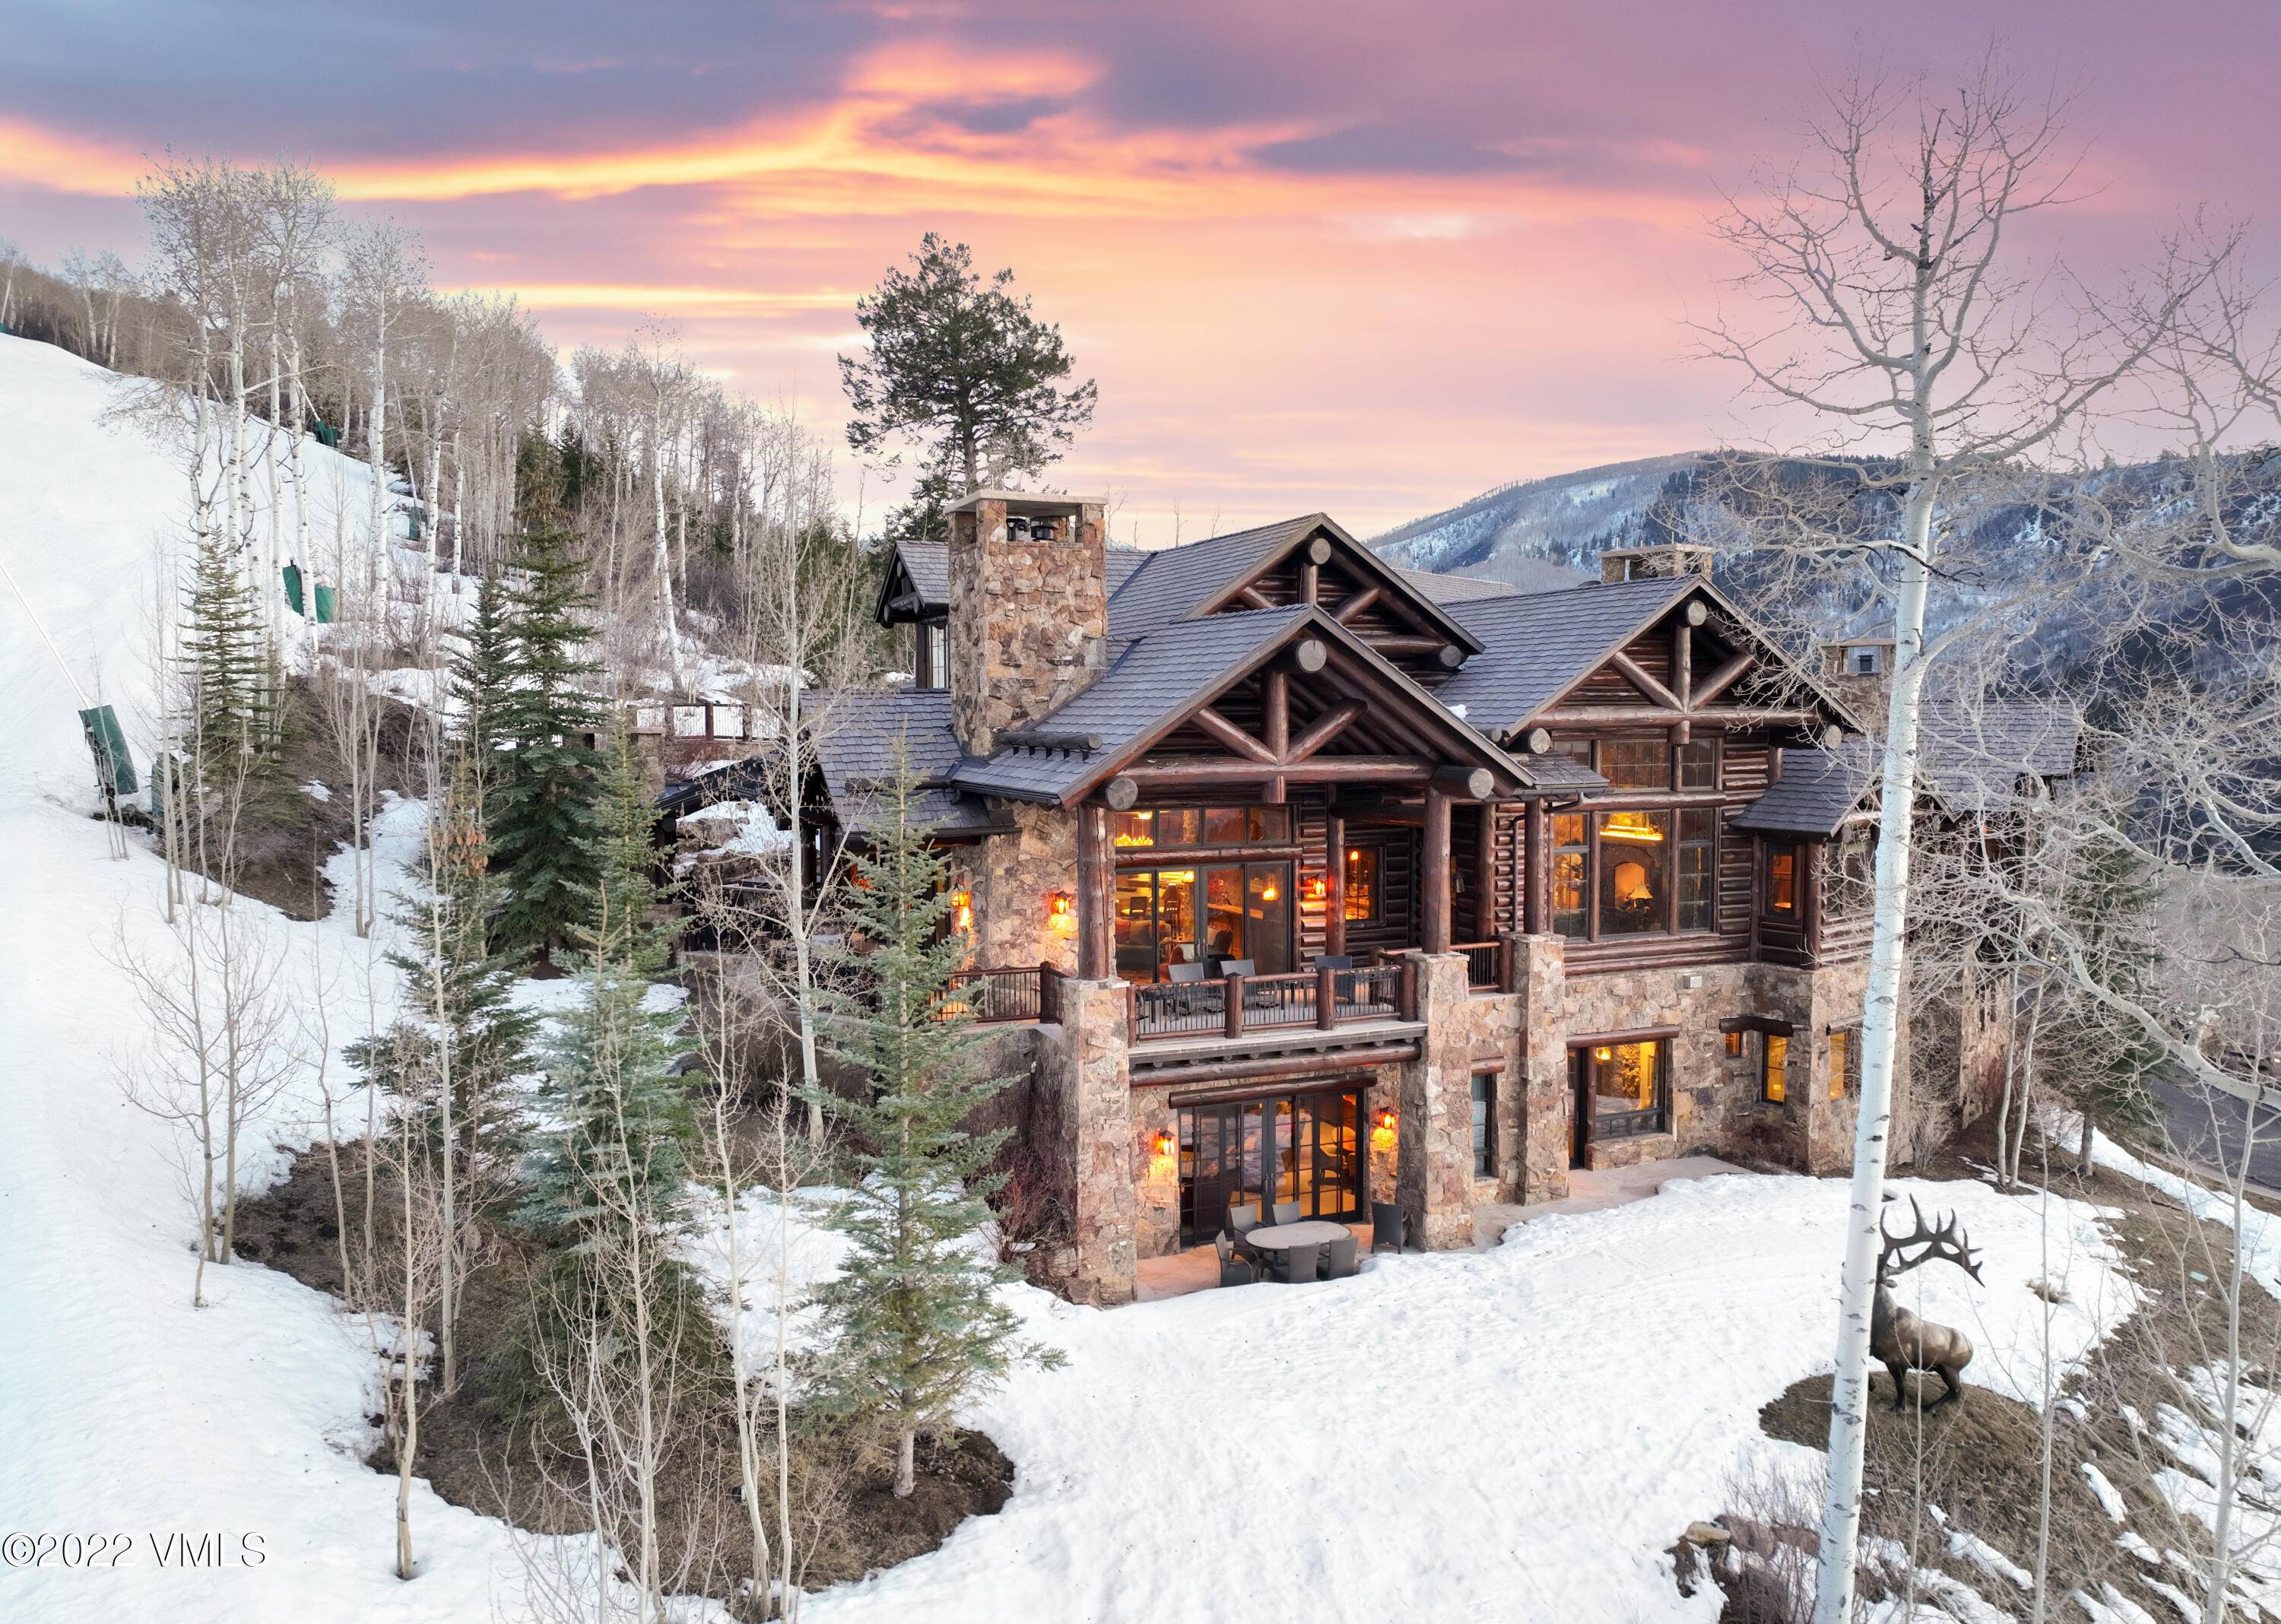 This magnificent legacy estate is truly the pinnacle of luxury mountain living.